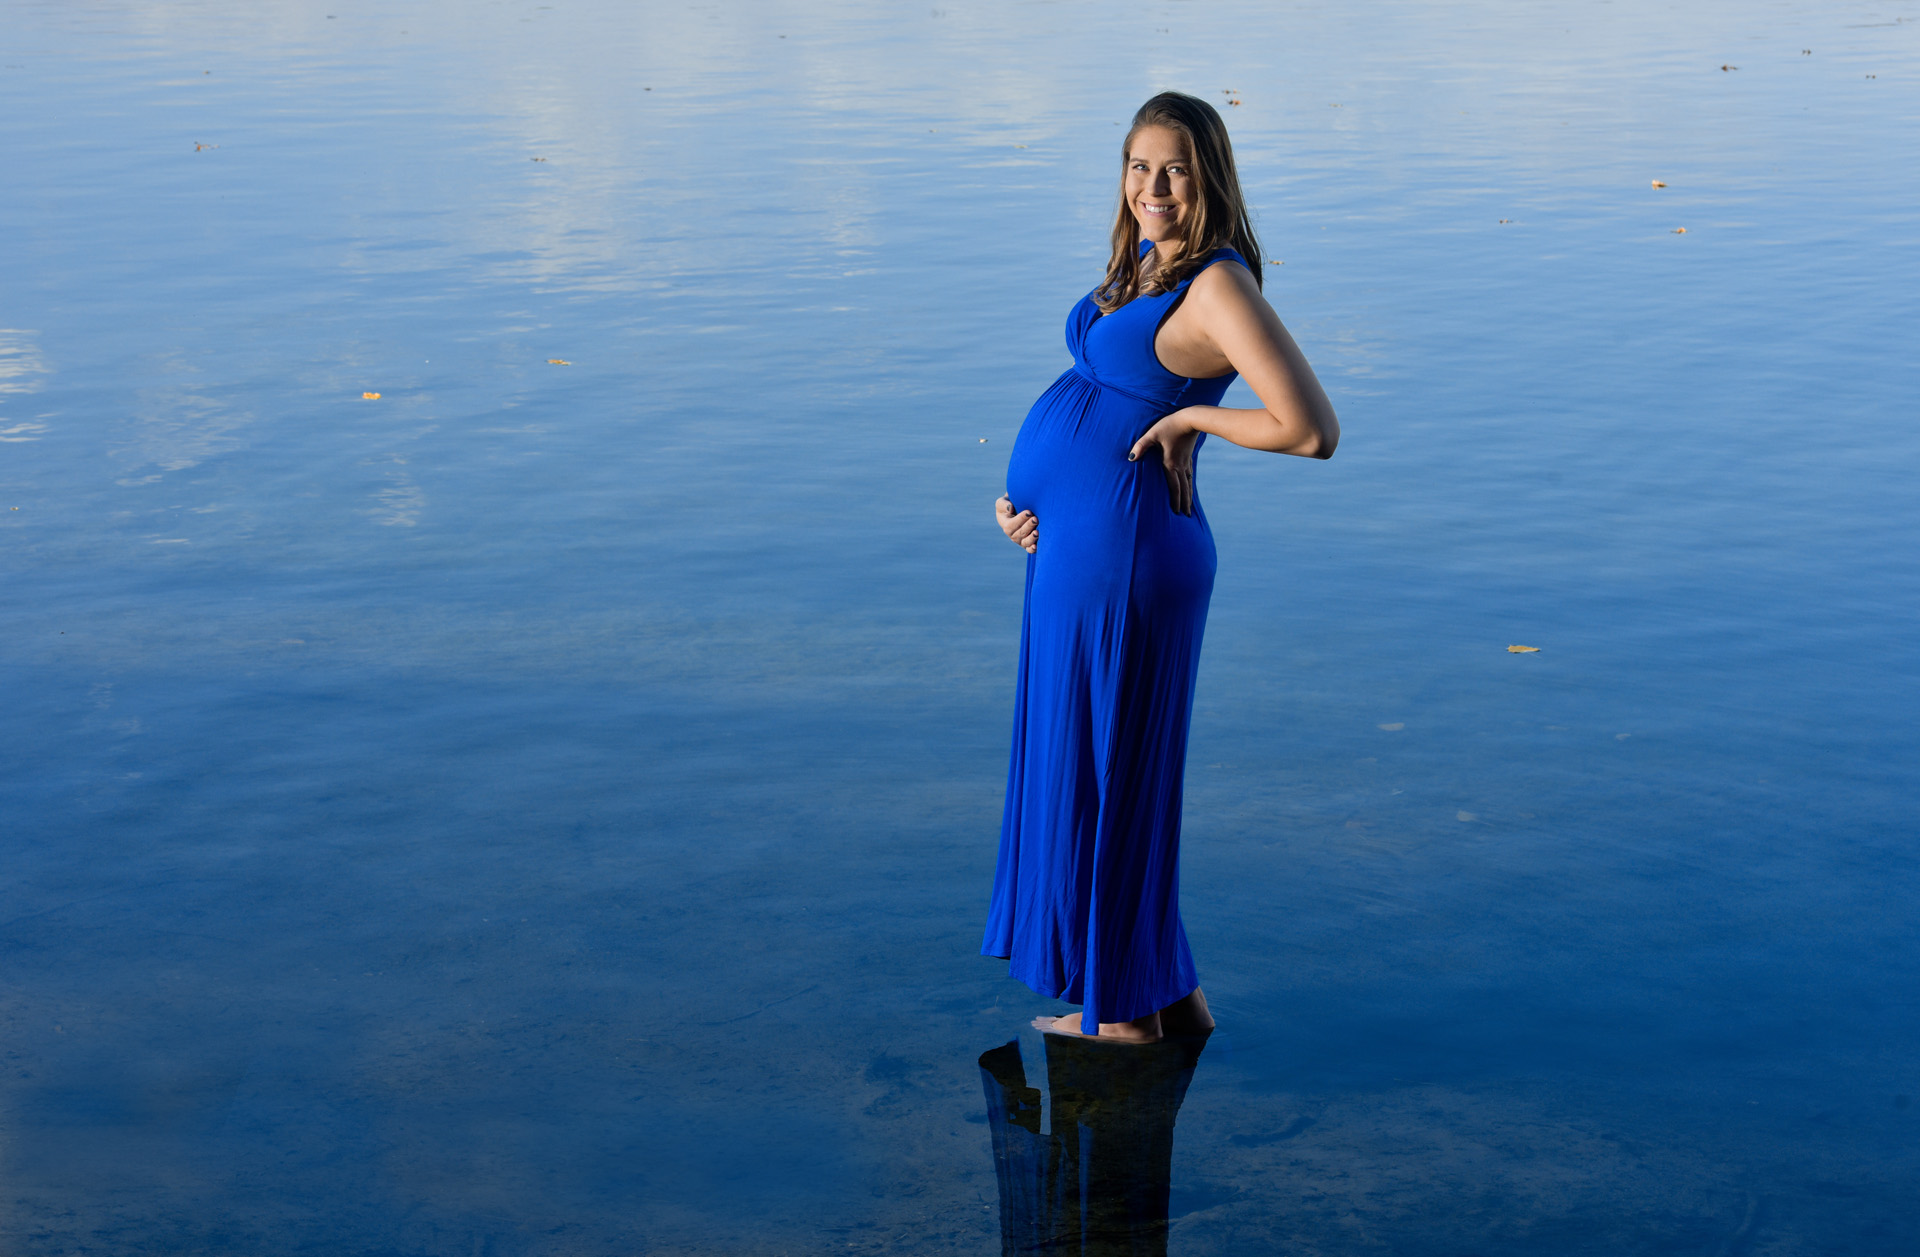 Super creative maternity photography taken with an 8 month pregnant woman floating on a lake in Rochester, Michigan.